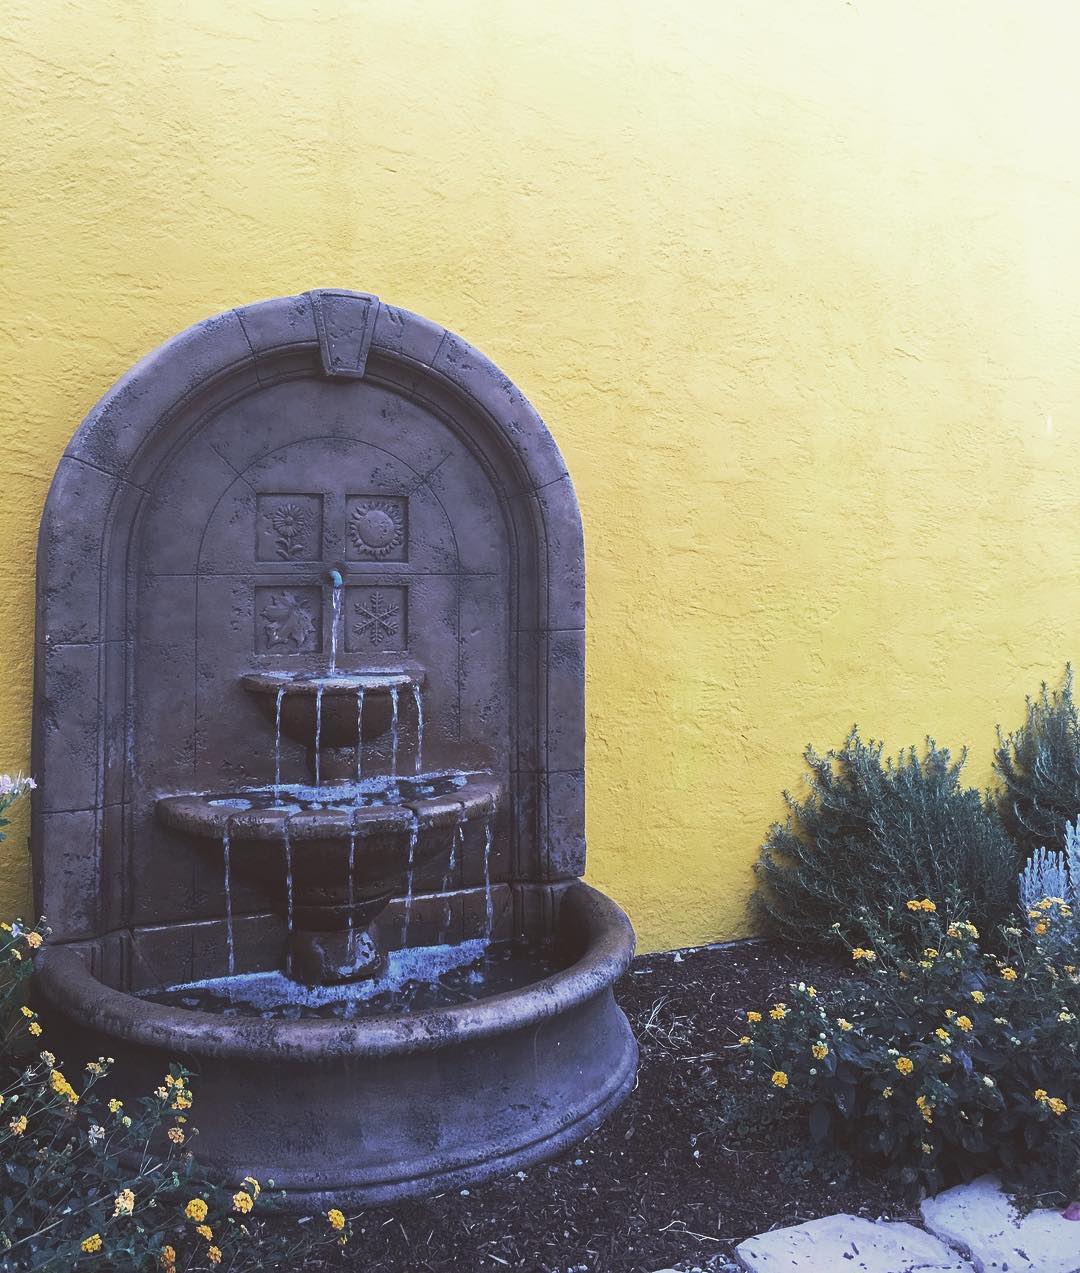 backyard fountain attached to a yellow wall in a flower bed photo by Instagram user @zjeepn.adventures